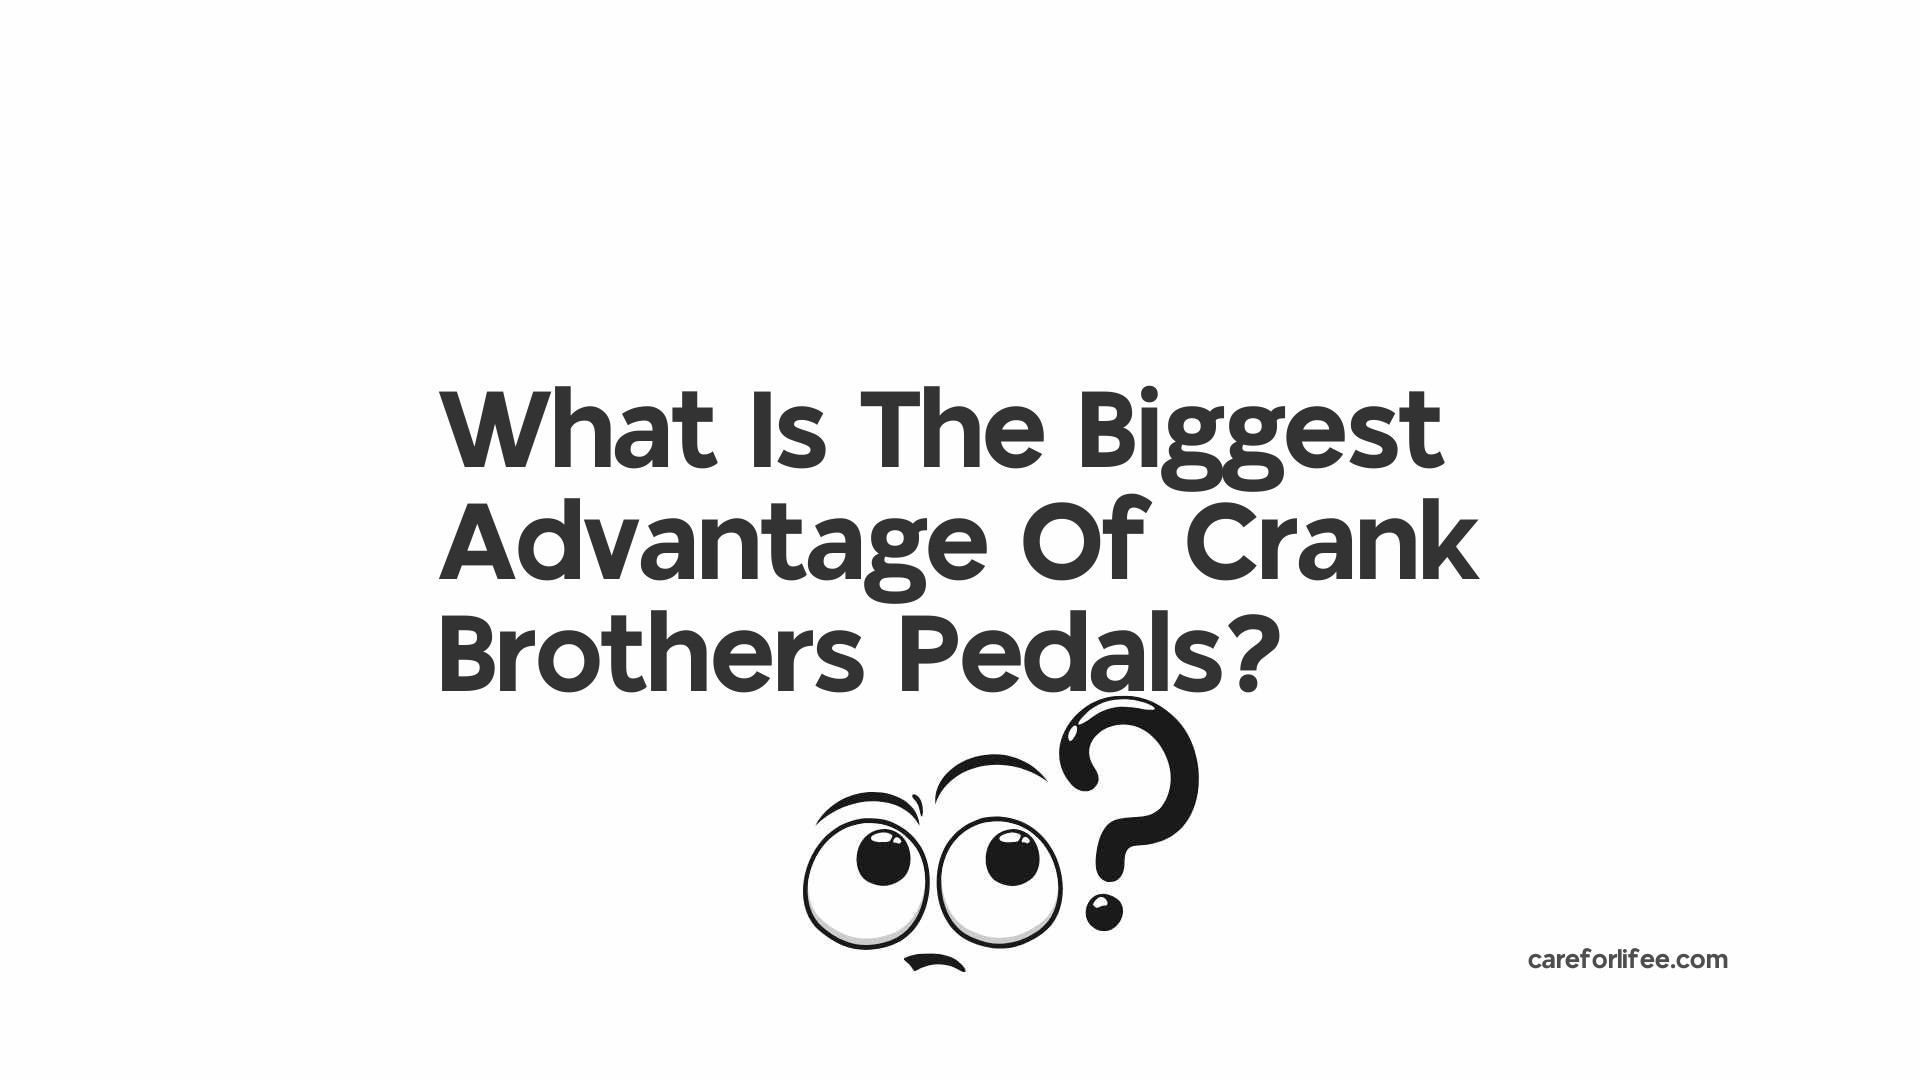 What Is The Biggest Advantage Of Crank Brothers Pedals?